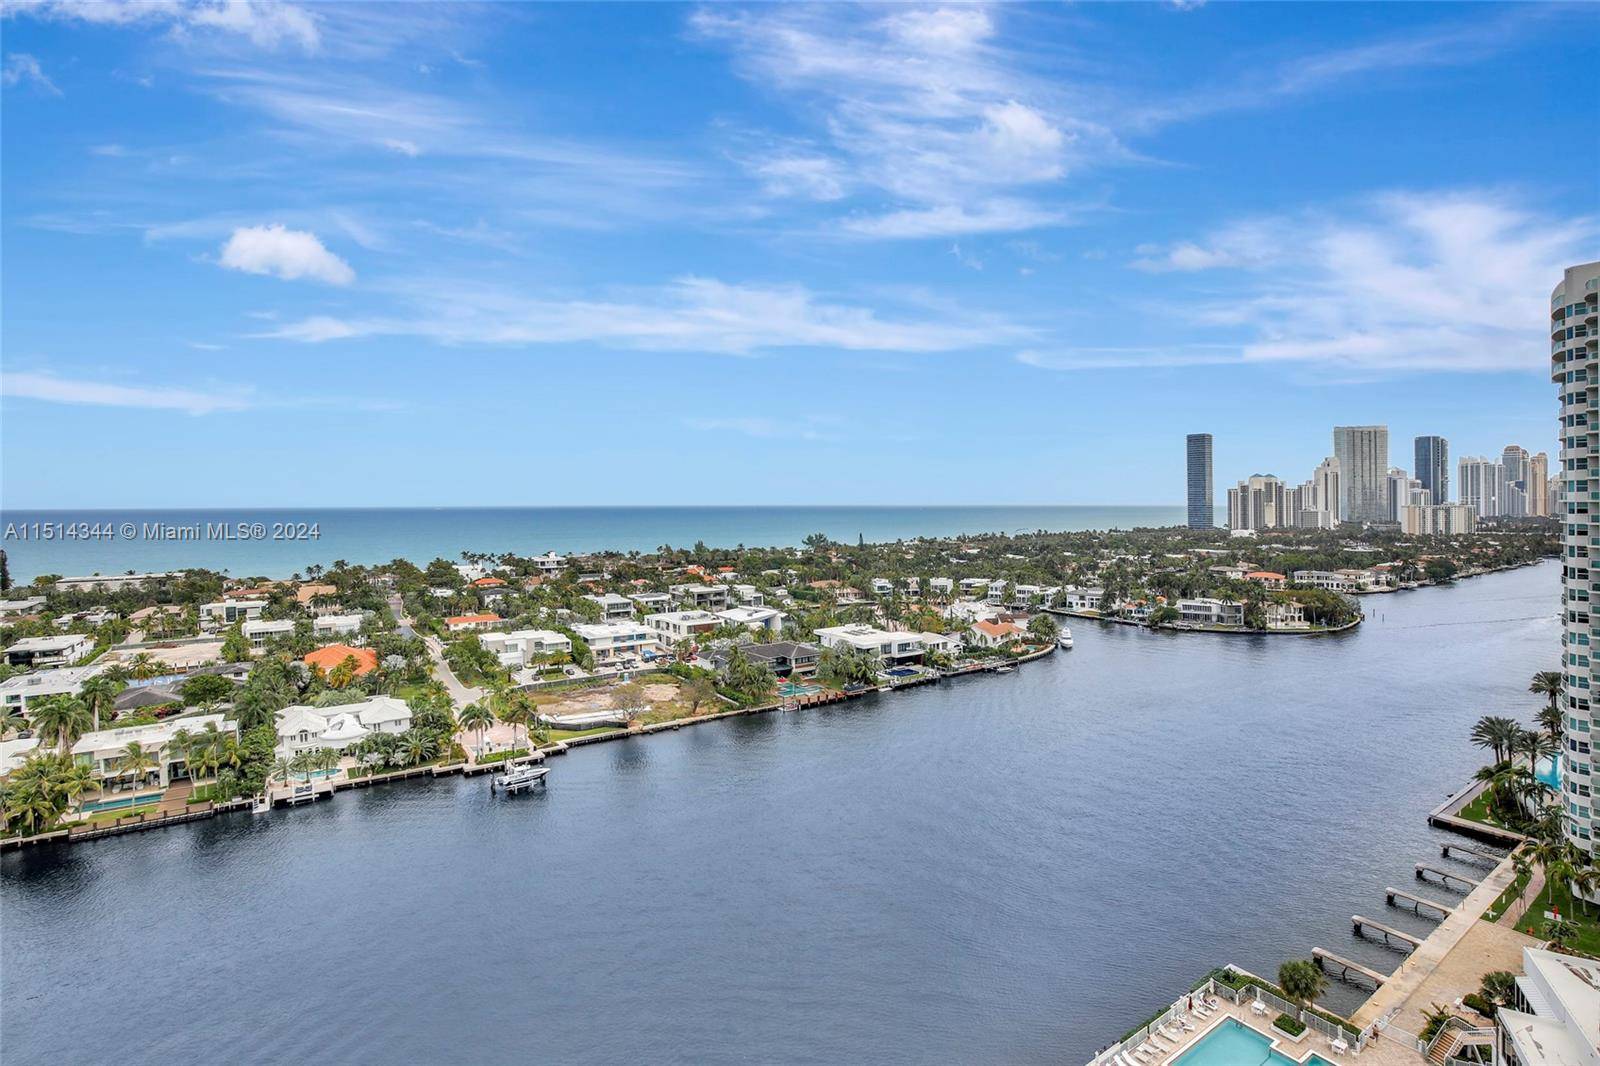 SPECTACULAR, DIRECT OCEAN AND INTRACOASTAL VIEWS FROM EVERY ROOM TRULY A RARE OPPORTUNITY THIS GORGEOUS UNIT WAS COMPLETELY AND TASTEFULLY RENOVATED NEW IMPACT FLOOR TO CEILING WINDOWS AND SLIDING DOORS ...